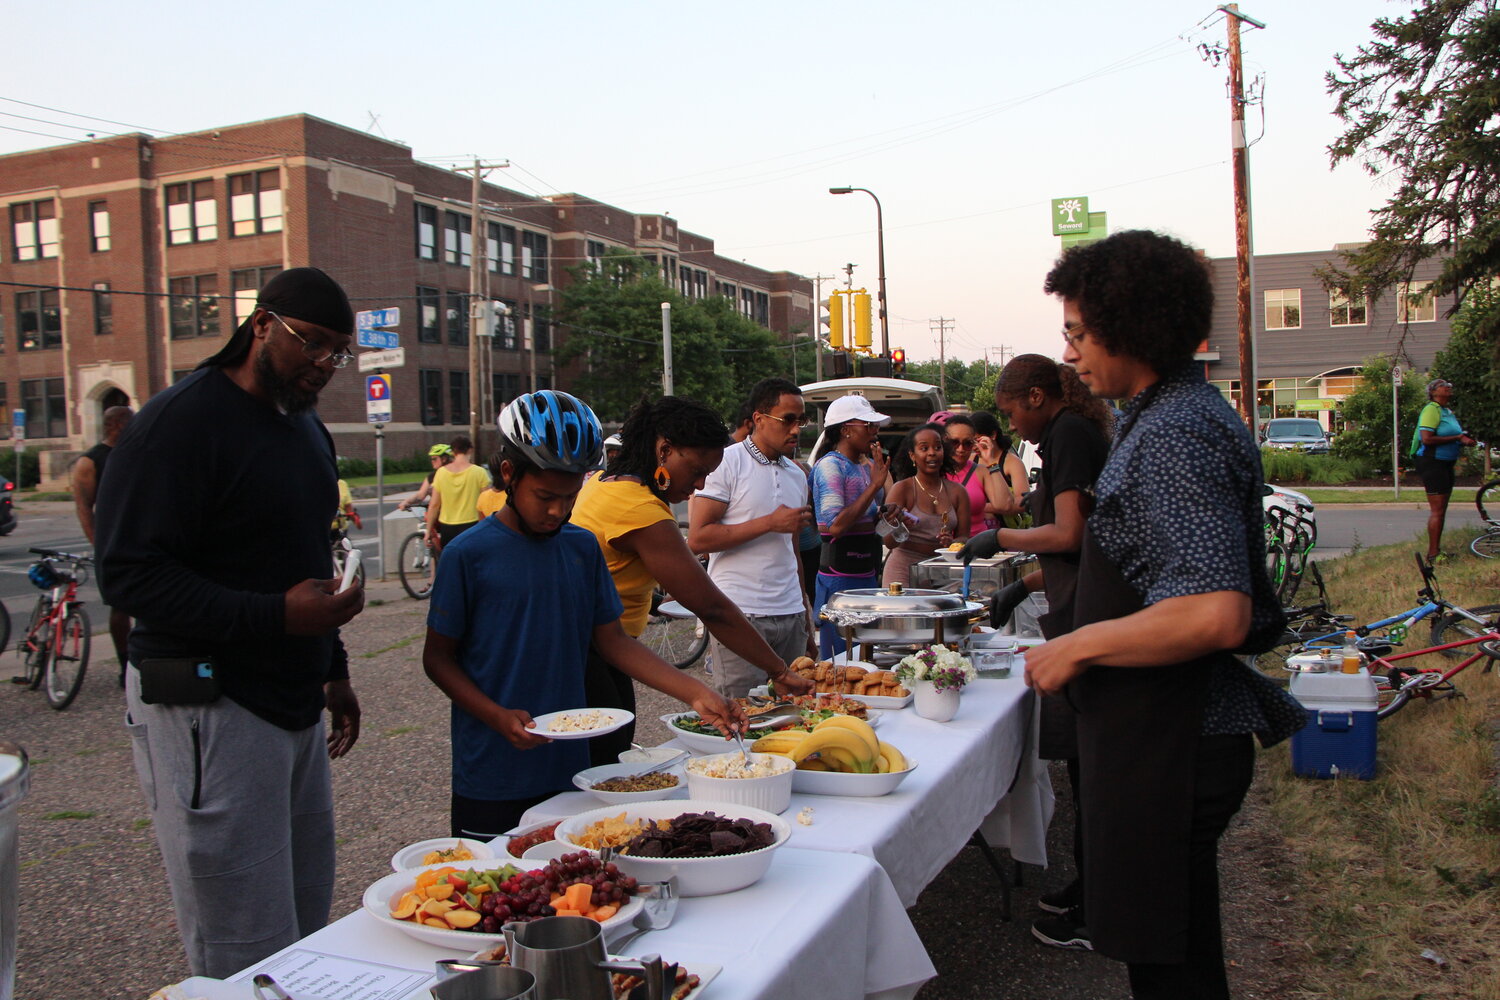 Anthony Taylor, Slow Roll members and team gather and eat together on 3rd Avenue in South Minneapolis at the end of the Hotter than July Southside Late Solstice Roll on Thursday, June 29.